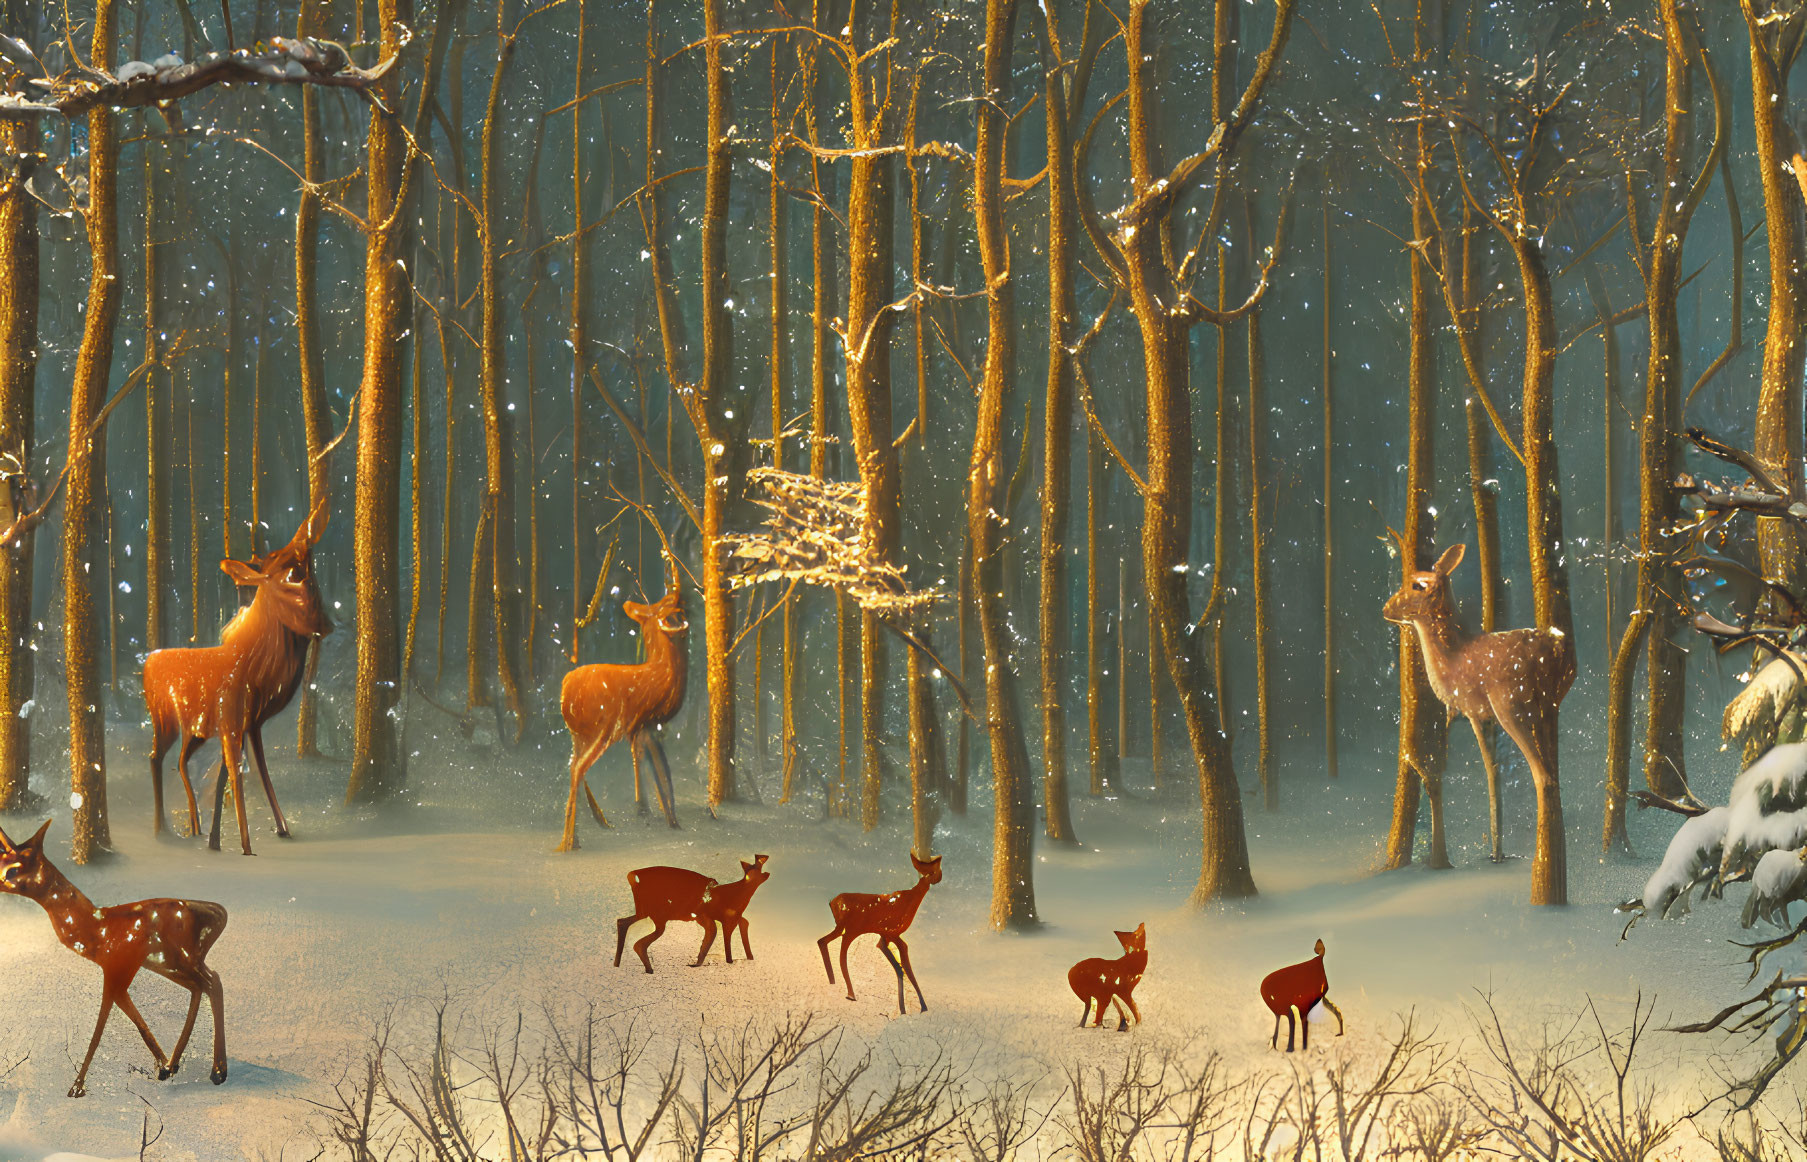 Winter forest scene with deer, snowfall, and warm light